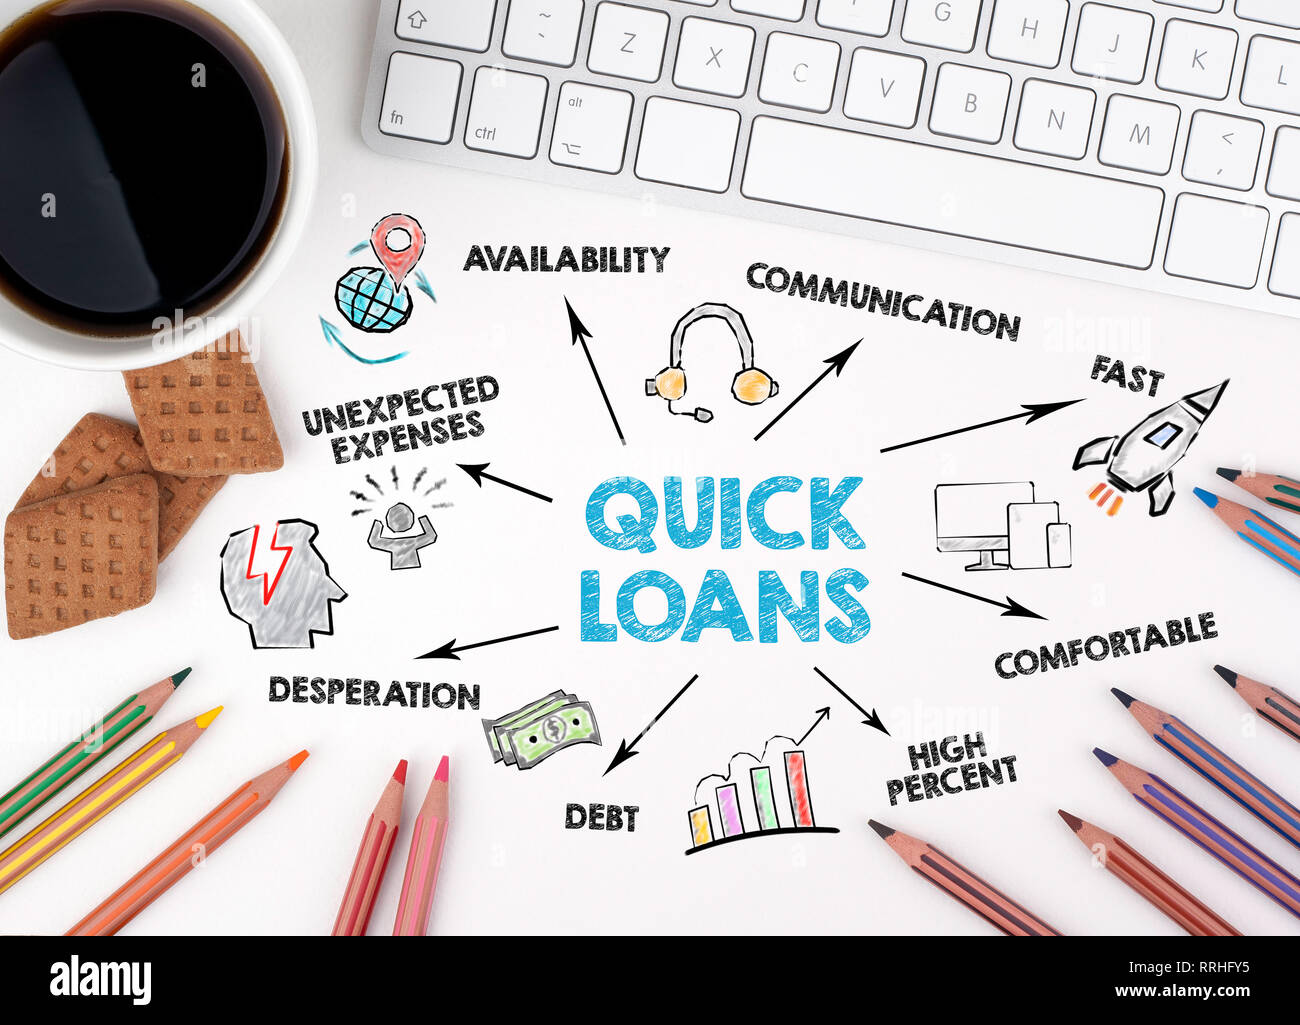 Quick Loans Concept. Chart with keywords and icons Stock Photo